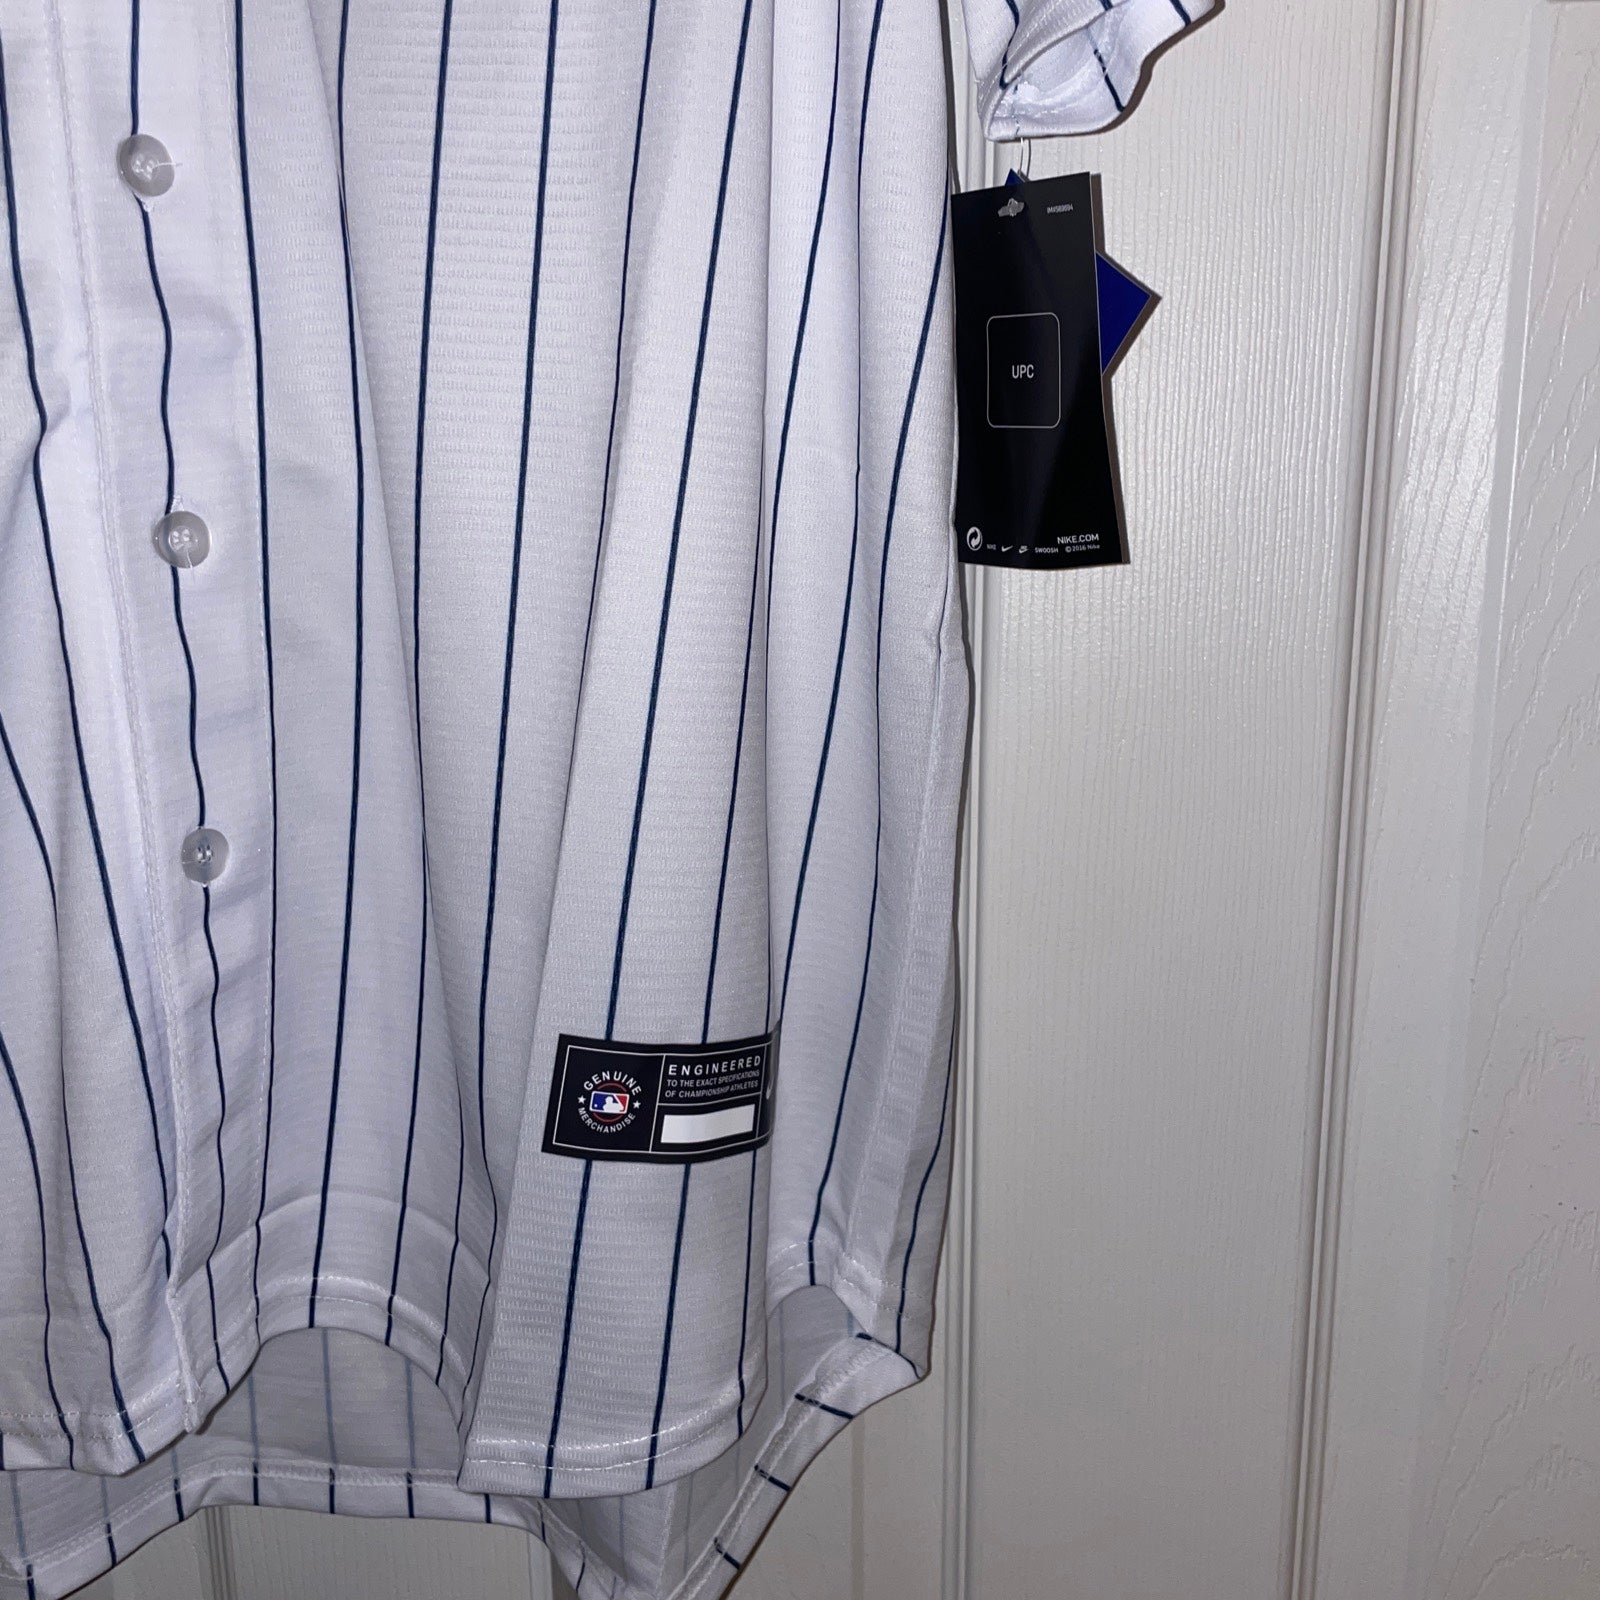 Brand New New York Yankees Aaron Judge Jersey with Tags - Size